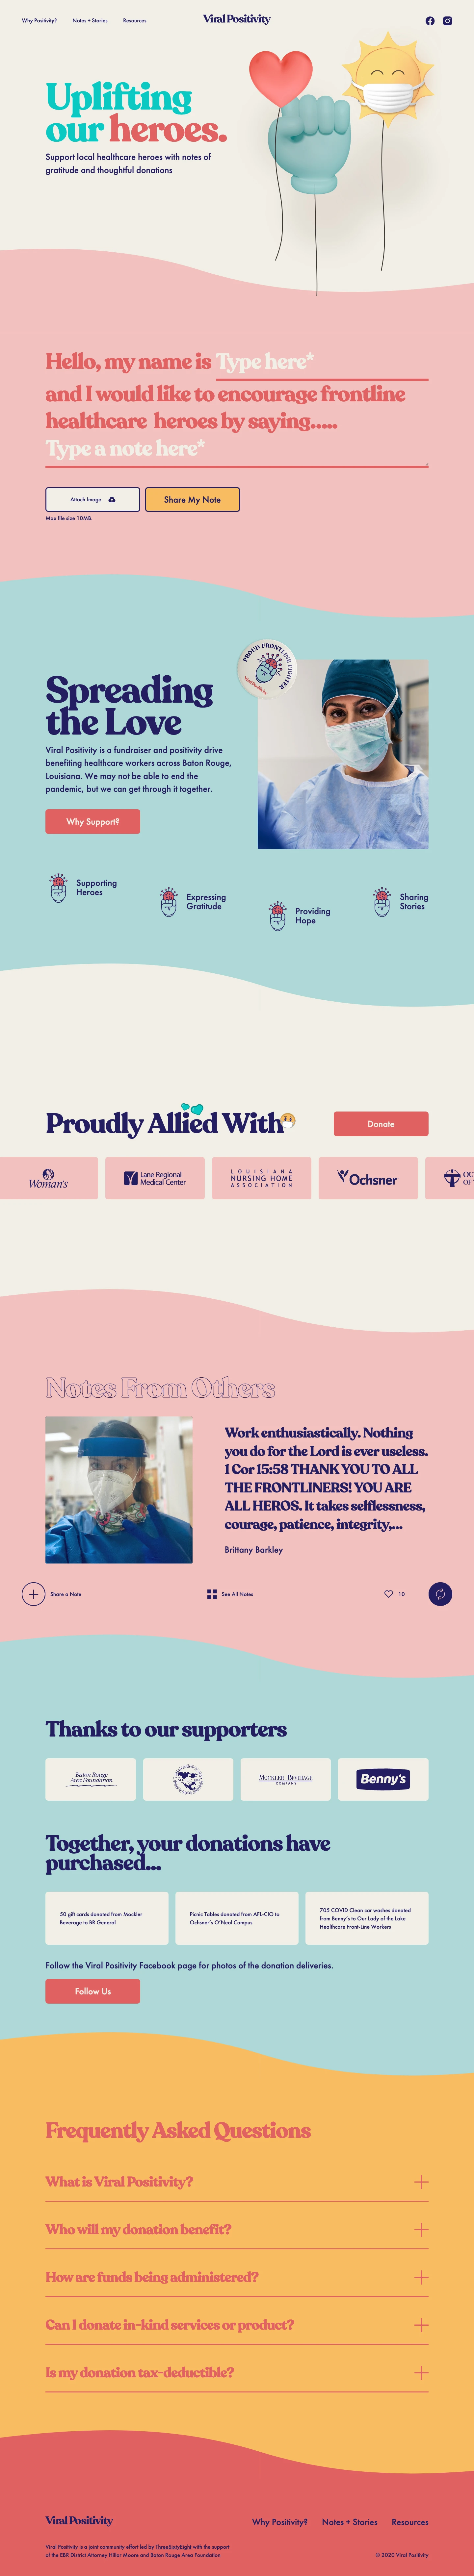 Viral Positivity Landing Page Example: Uplifting our heroes. Support local healthcare heroes with notes of gratitude and thoughtful donations.